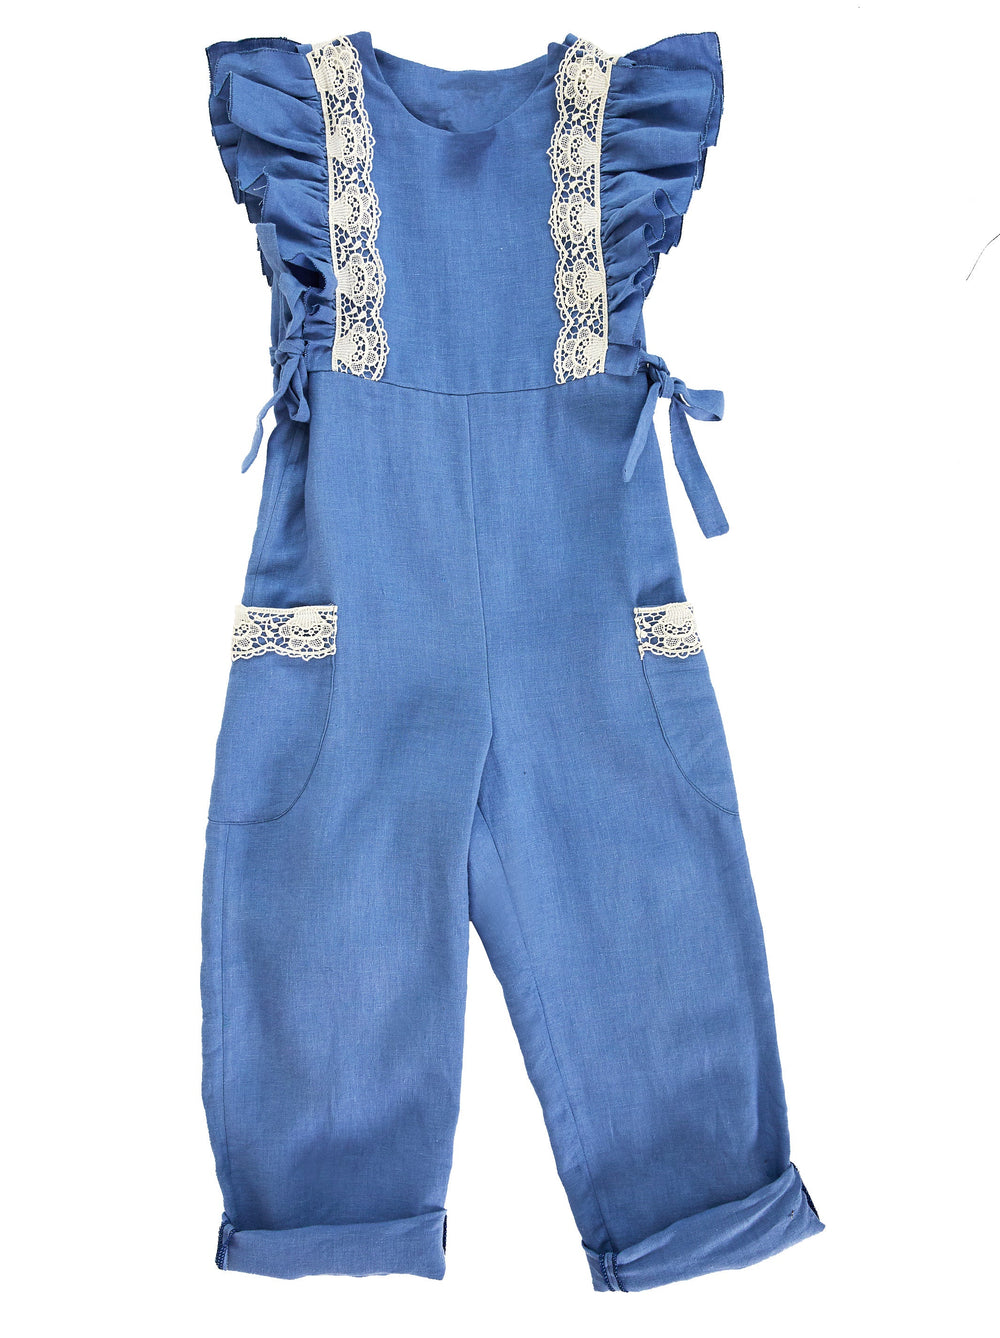 Burda Style Pattern 9265 Kids Overalls from Jaycotts Sewing Supplies